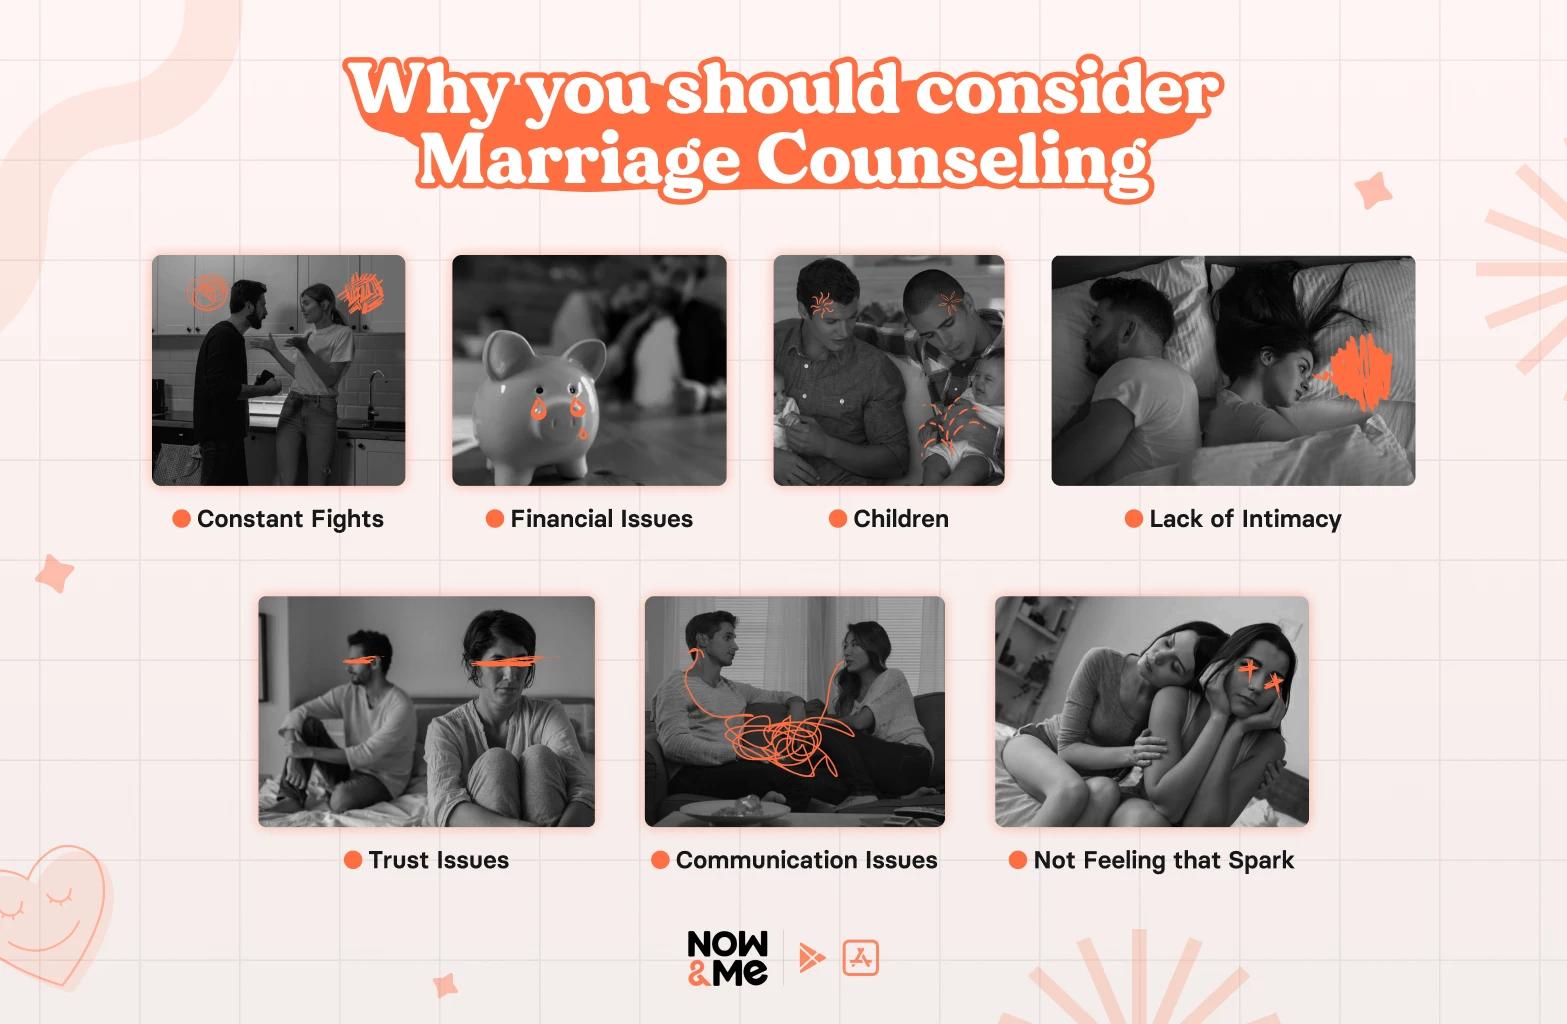 Why Should You Consider Marriage Counseling?